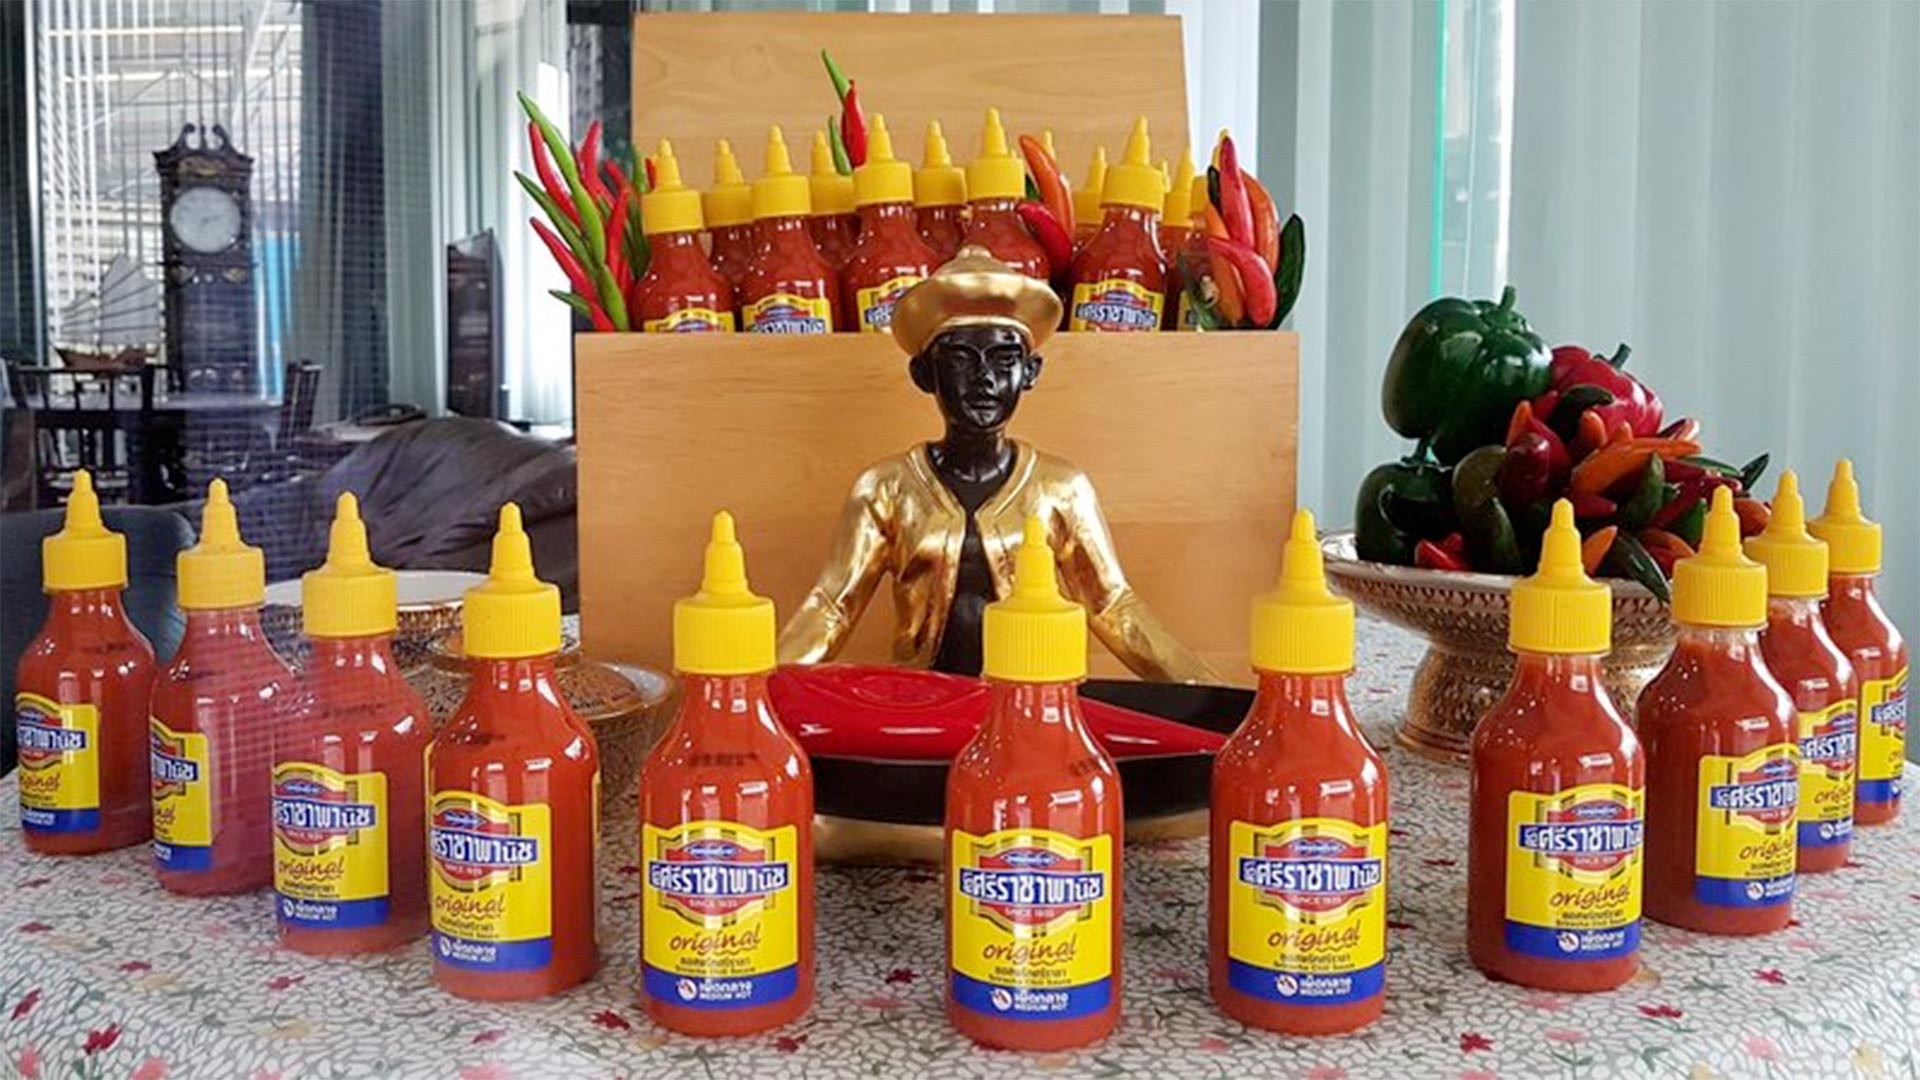 Sriraja Panich is the brand name of one of two Sriracha sauces created by Saowanit Trikityanukul's family. The family sold the brand to Thaitheparos, Thailand's leading sauce company, in the 1980s. The brand has struggled to gain a foothold in the U.S., where the Huy Fong Rooster brand of Sriracha, created by Vietnamese-American David Tran, reigns supreme.